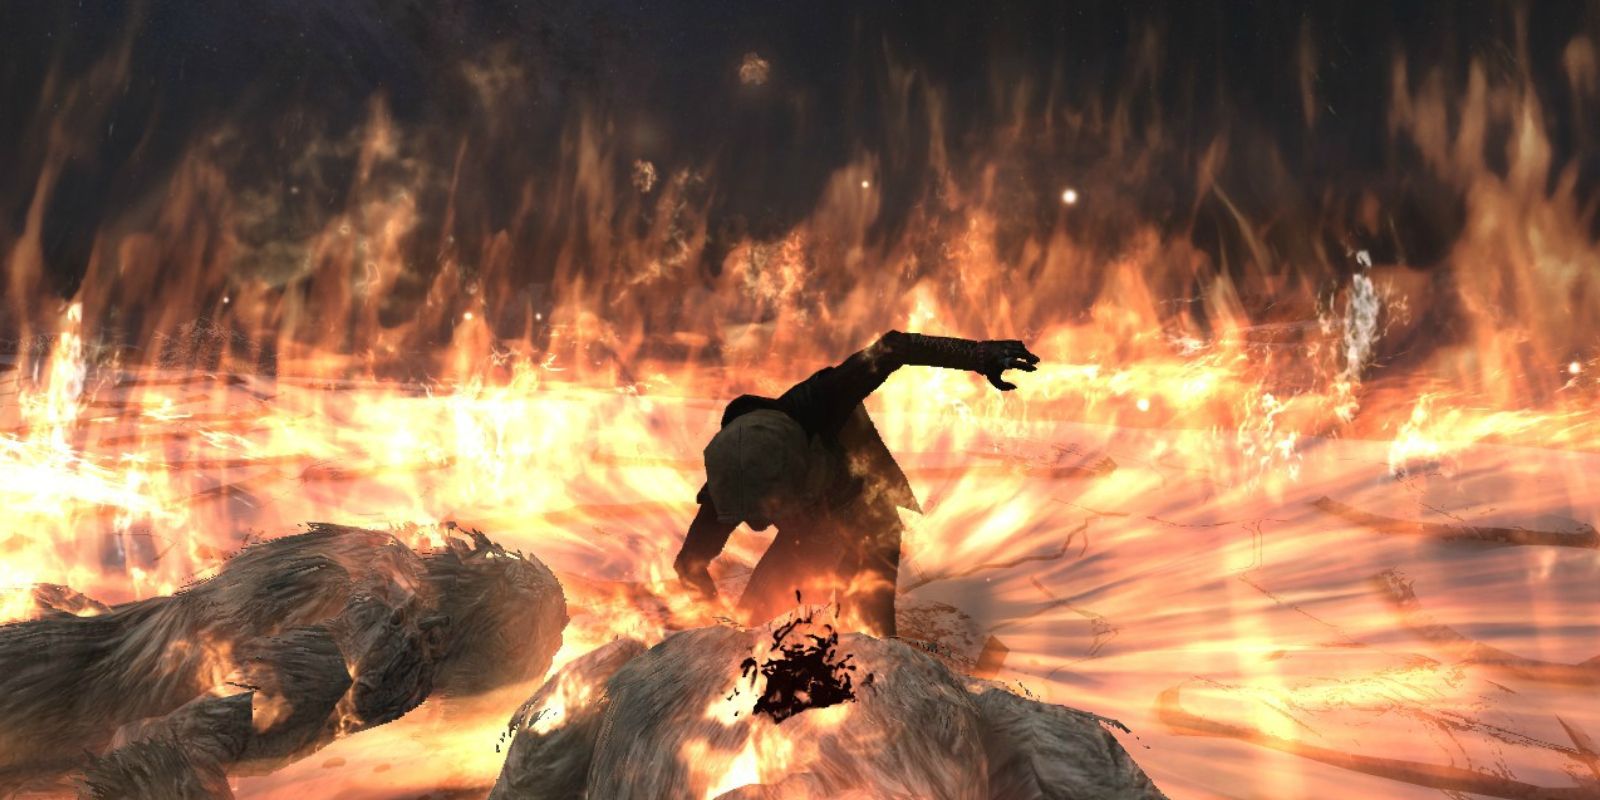 A Skyrim character using the Fire Storm spell.